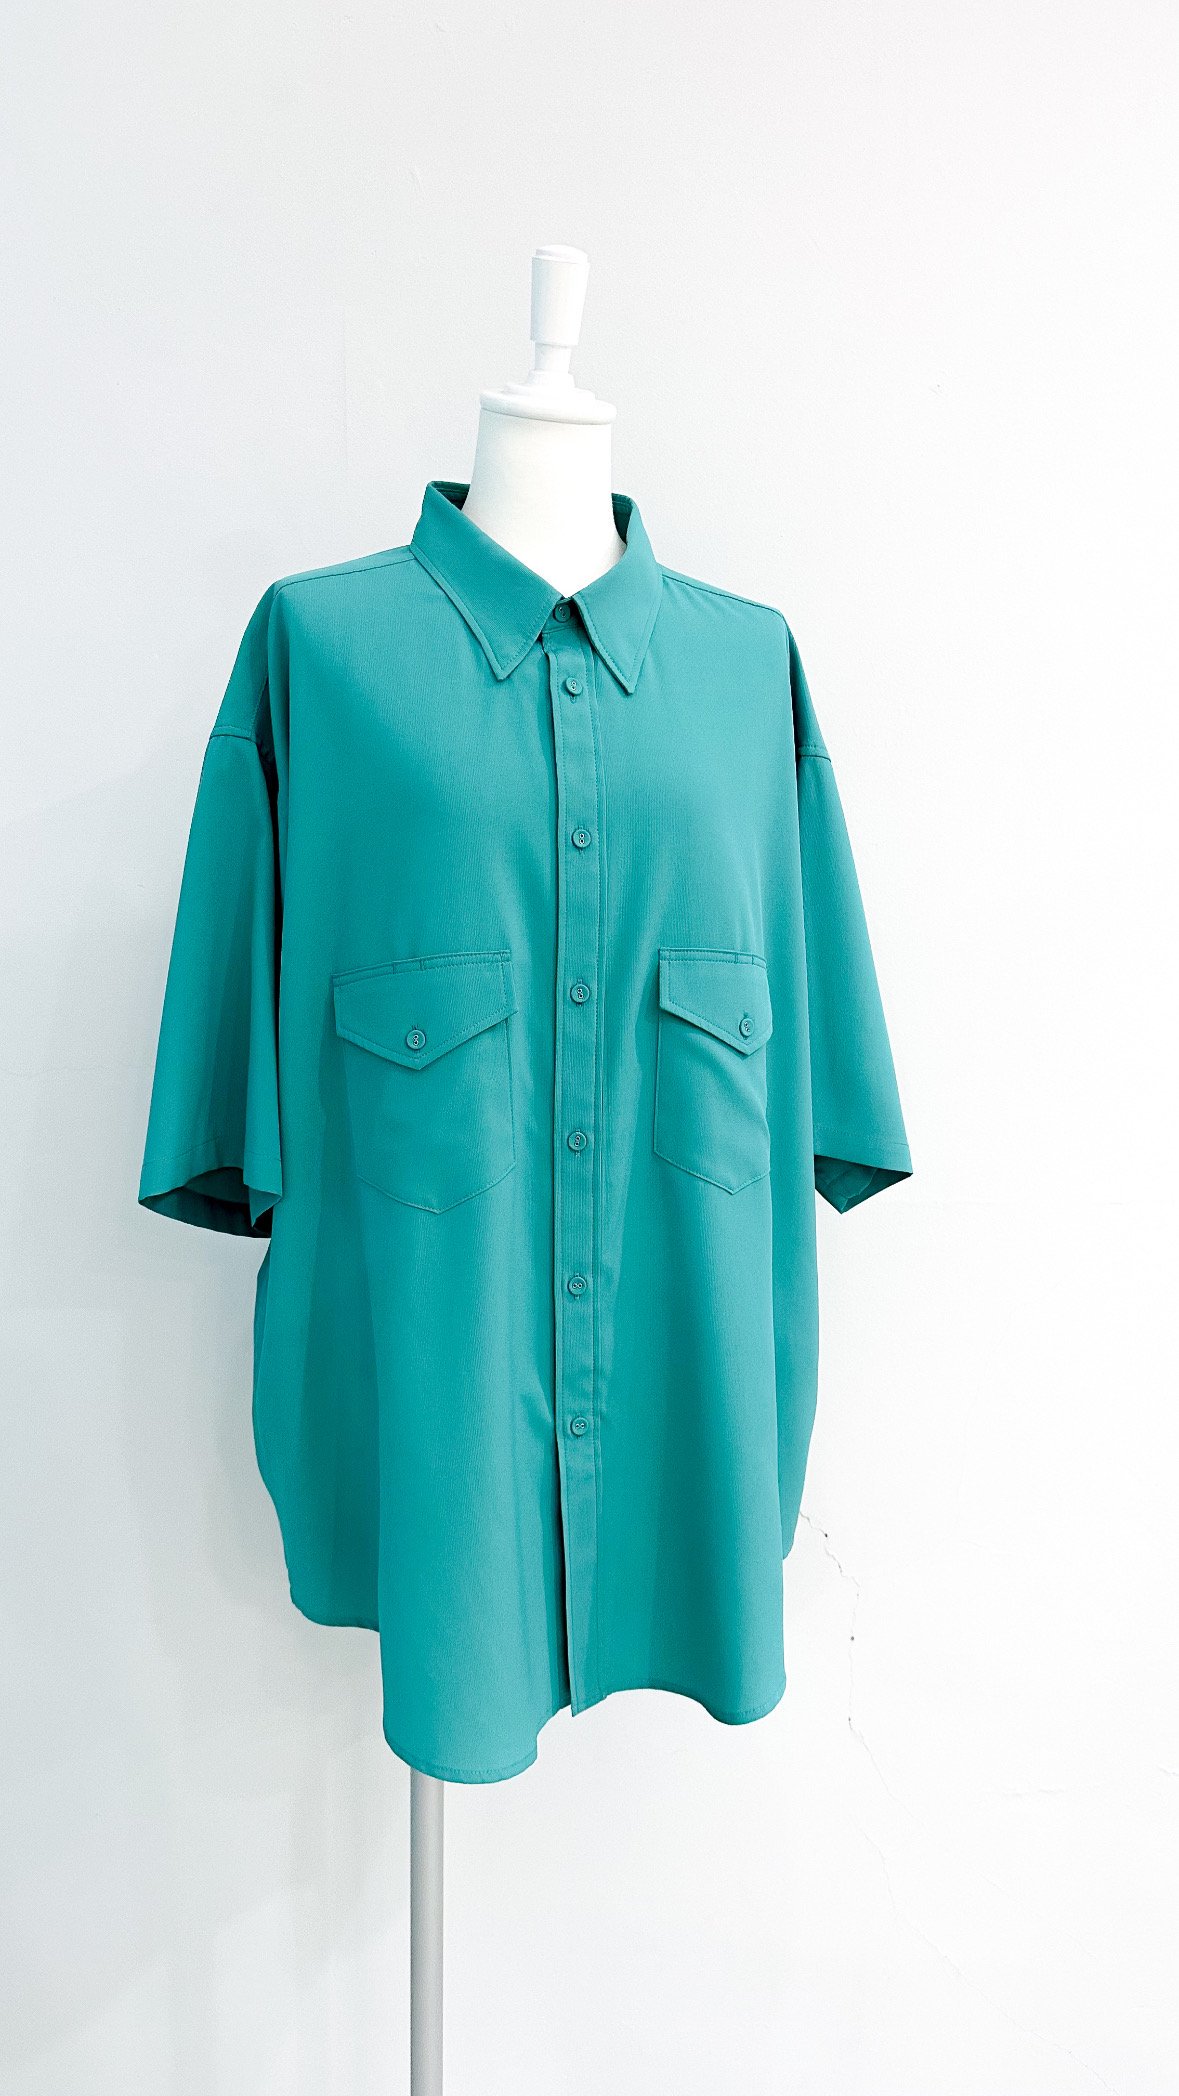 <img class='new_mark_img1' src='https://img.shop-pro.jp/img/new/icons47.gif' style='border:none;display:inline;margin:0px;padding:0px;width:auto;' />M.B.D ELBOW SLEEVE SHIRT